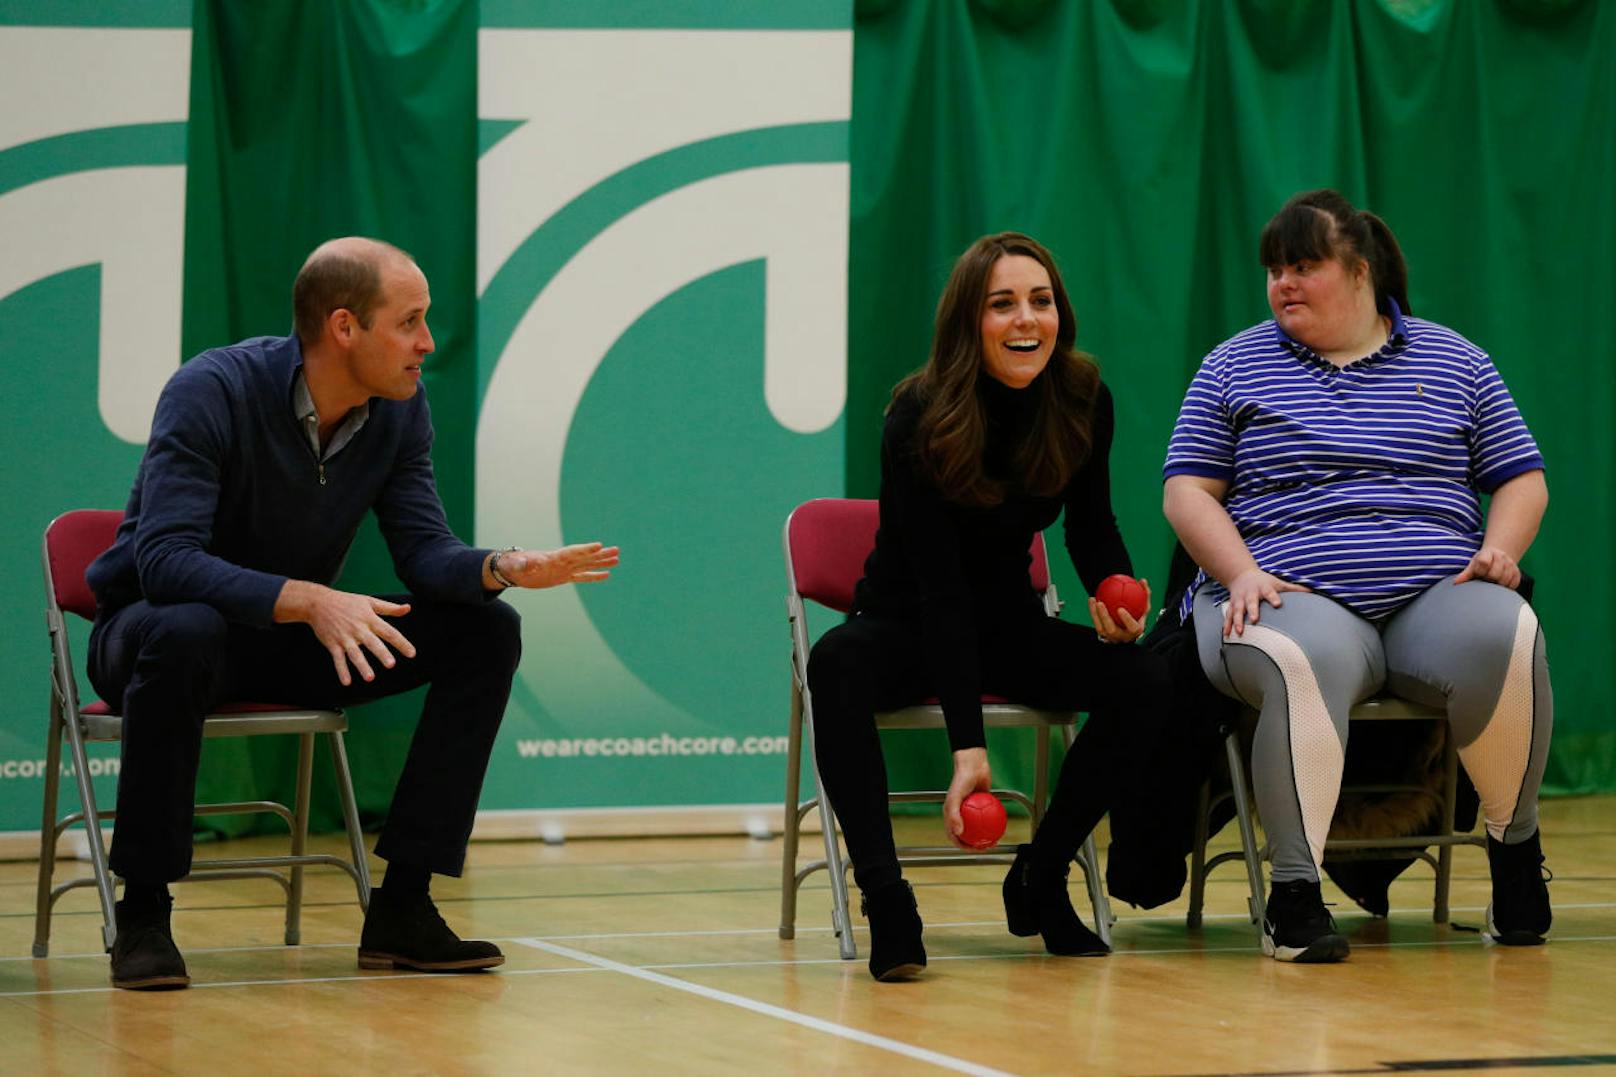 BASILDON, ENGLAND - OCTOBER 30:  Prince William, Duke of Cambridge and Catherine, Duchess of Cambridge play boccia with a participant as they join a session during a visit to the Coach Core Essex apprenticeship scheme at Basildon Sporting Village on October 30, 2018 in Basildon, England. (Photo by Adrian Dennis - WPA Pool/Getty Images)